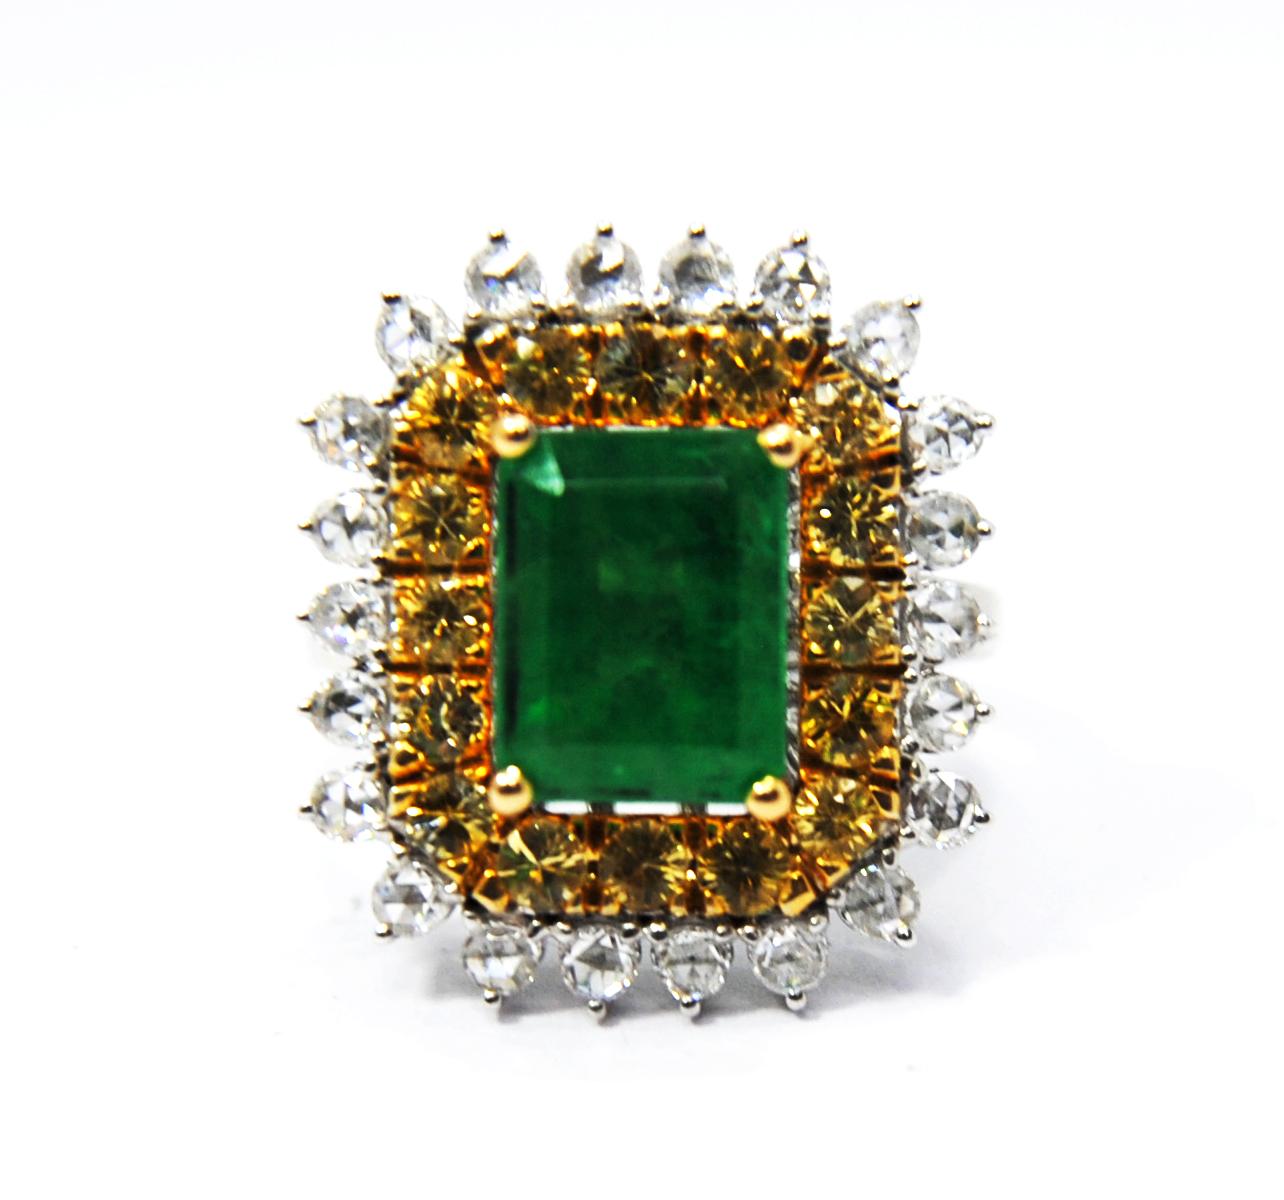 Irama Pradera is a Young designer from Spain that searches always for the best gems and combines classic with contemporary mounting and styles. 
Sleekly crafted in 18K white gold these chic  and voluptuous mounting nests perfectly the 2.77ct emerald